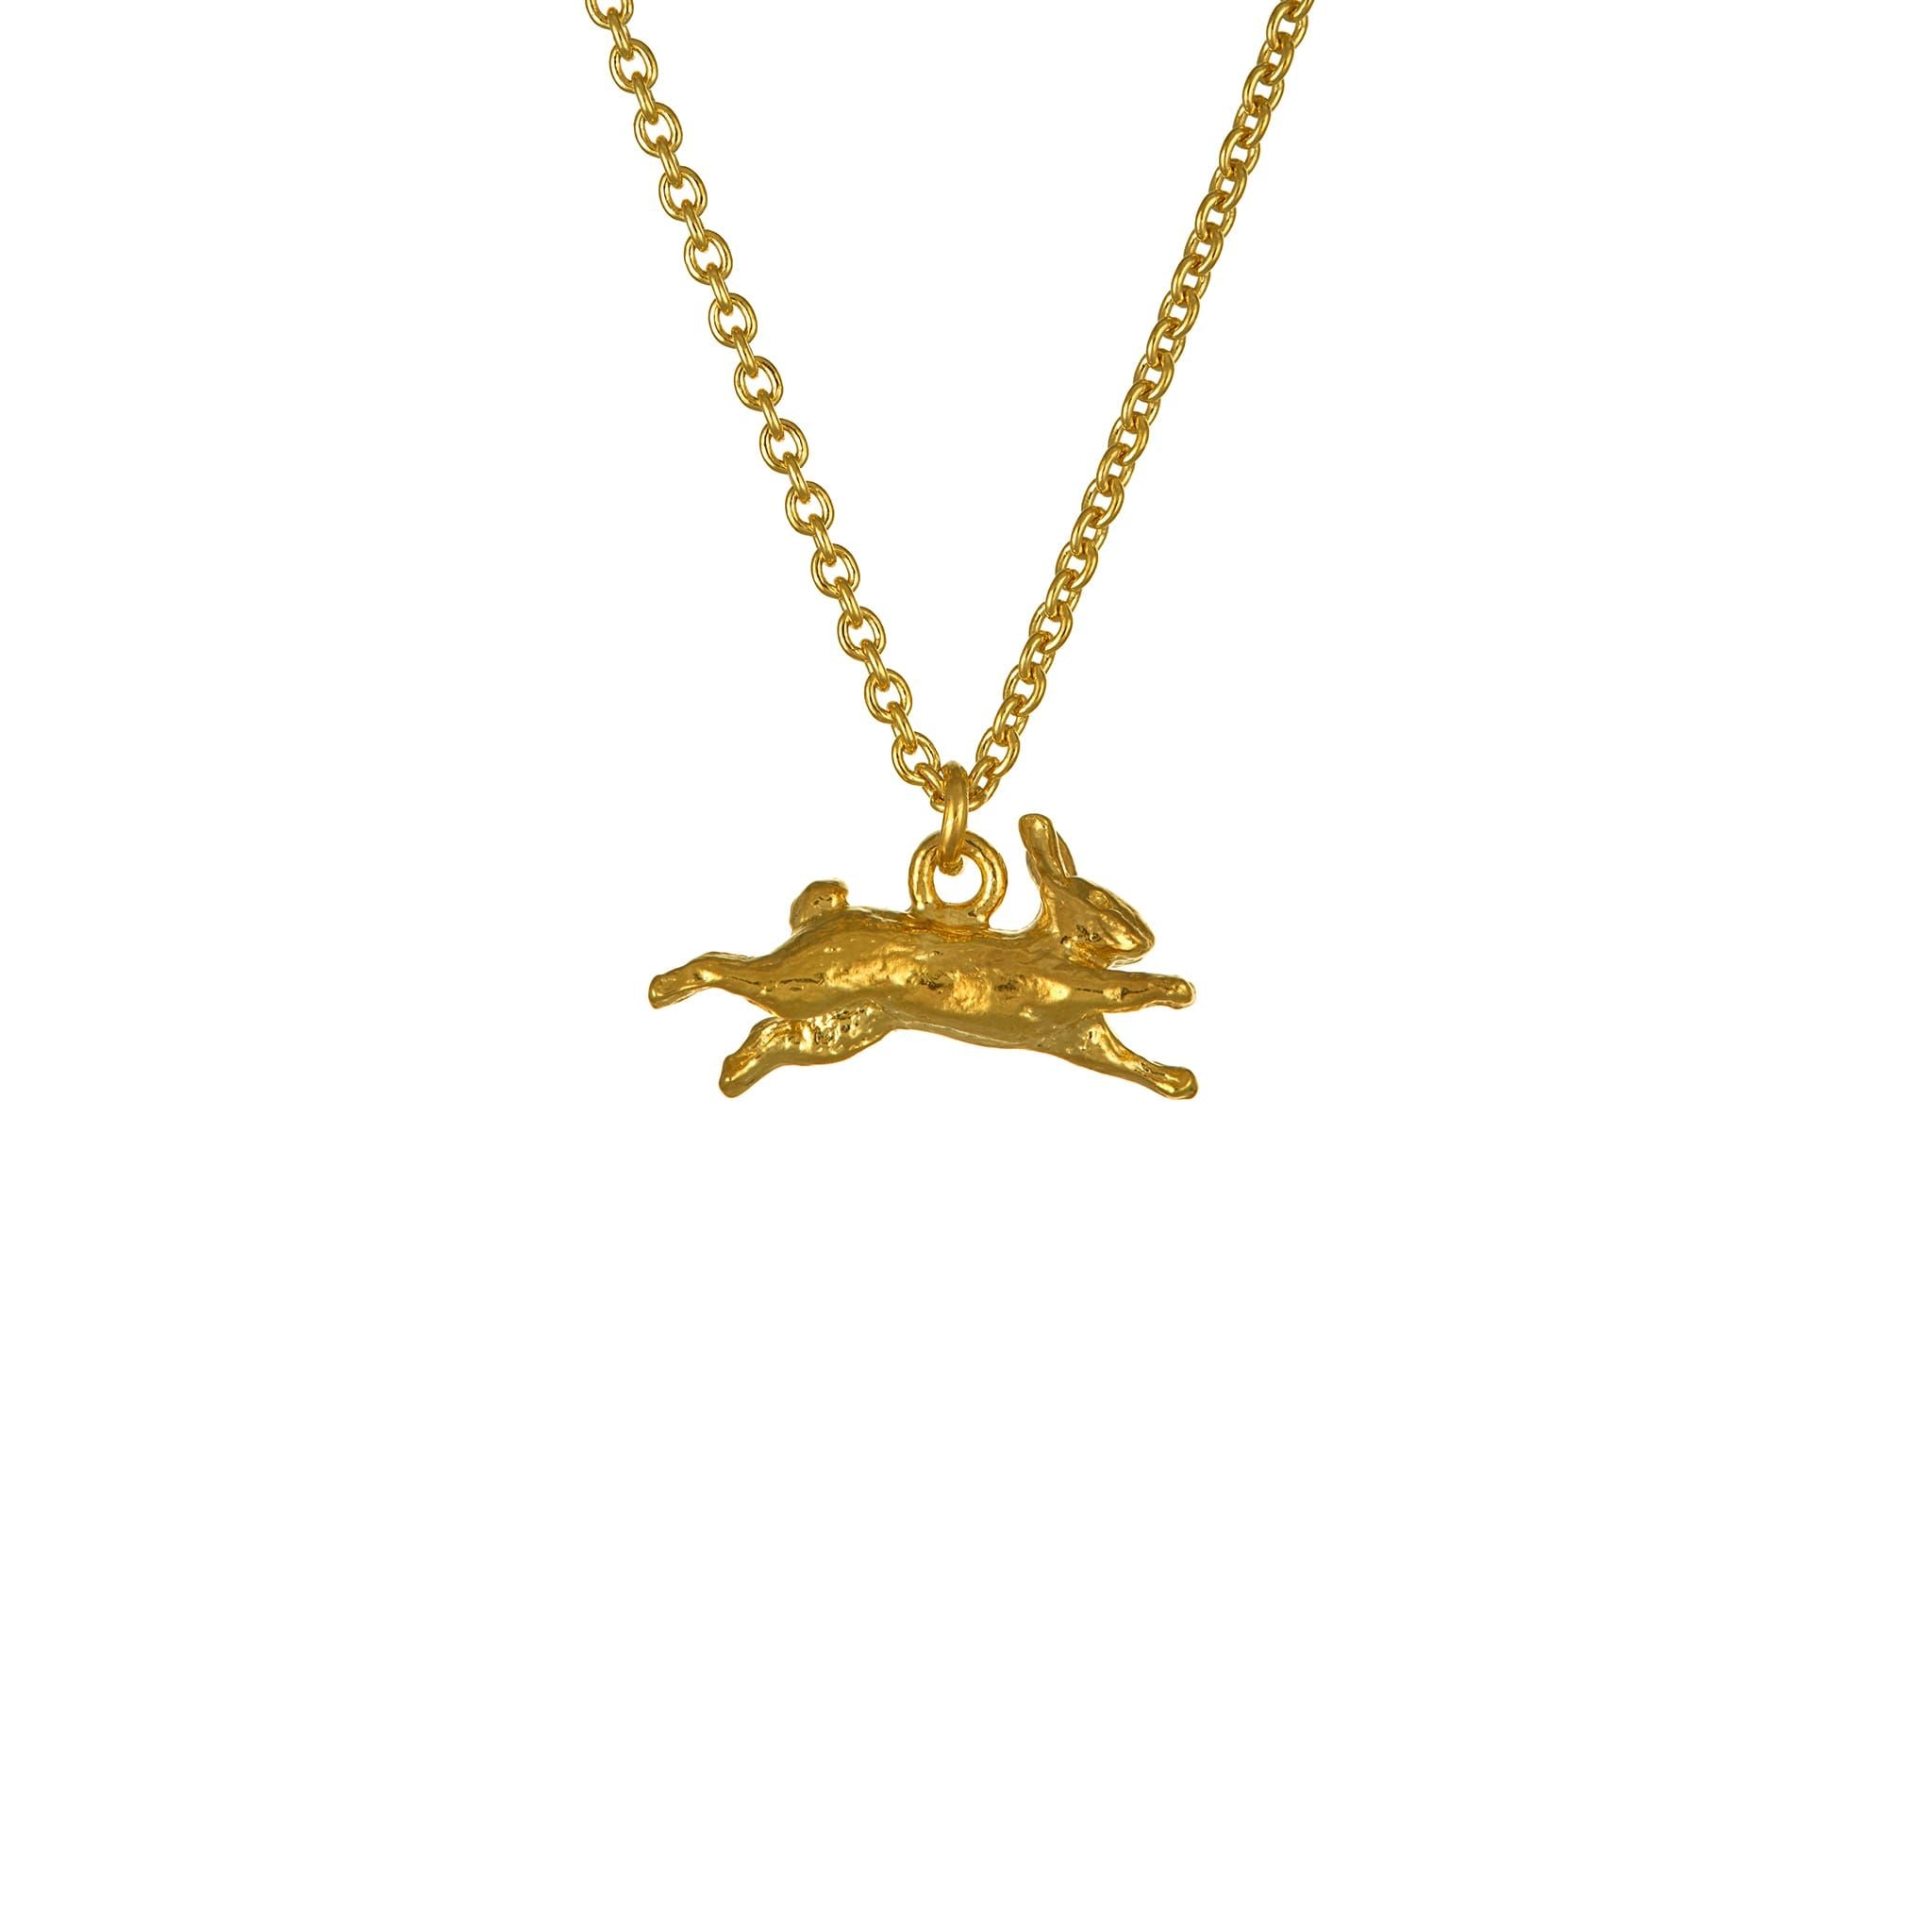 Gold Leaping Rabbit Necklace